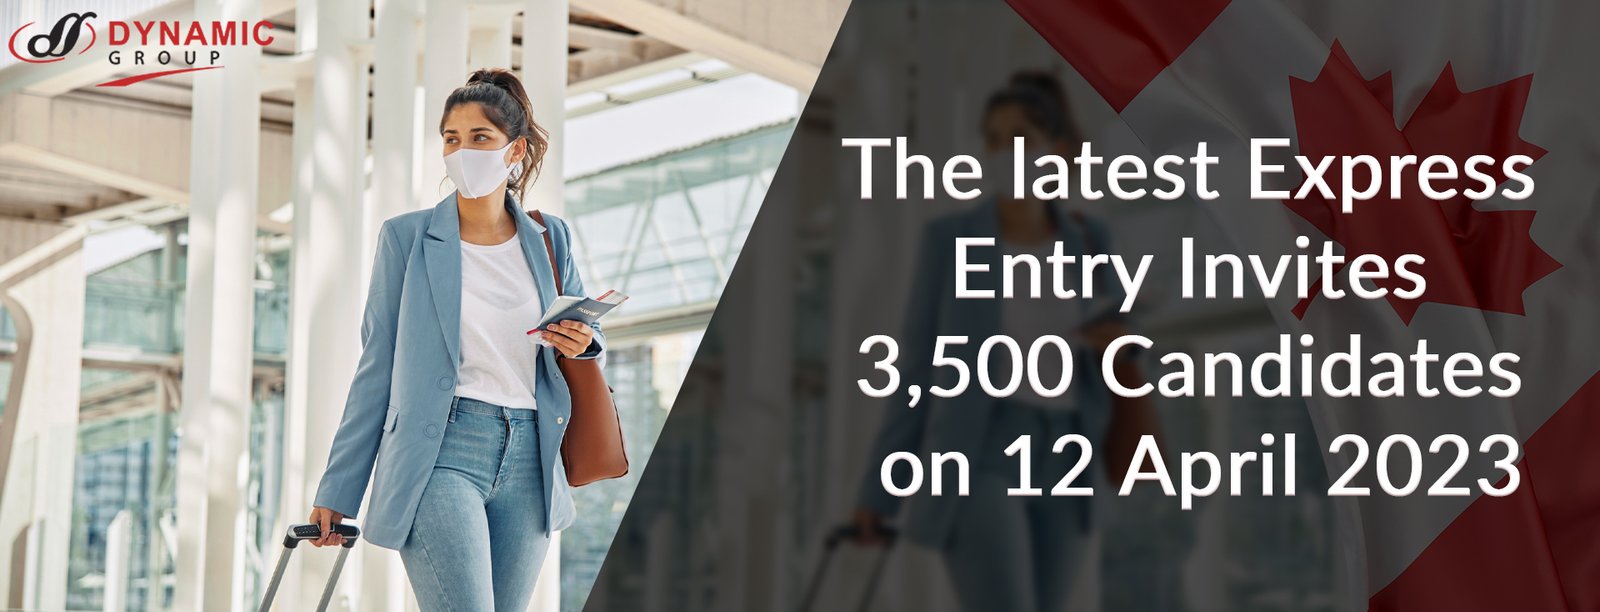 The latest Express Entry Invites 3,500 Candidates on 12 April 2023